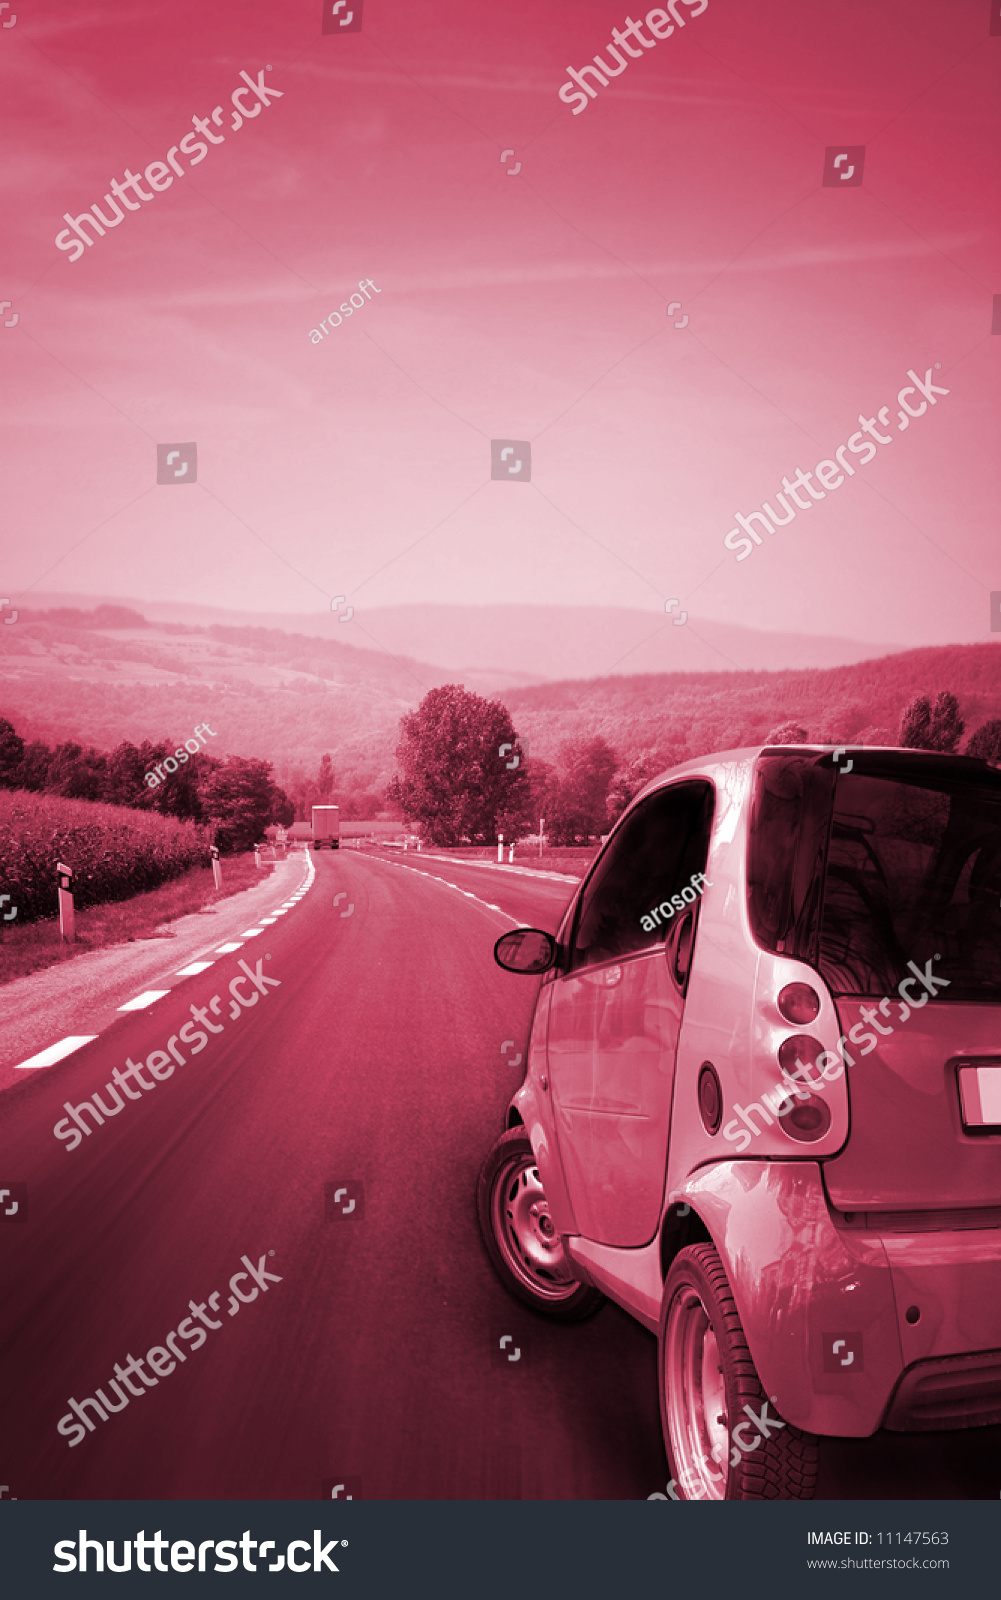 Beautiful Car Great Color Very Good Stock Photo 11147563  Shutterstock